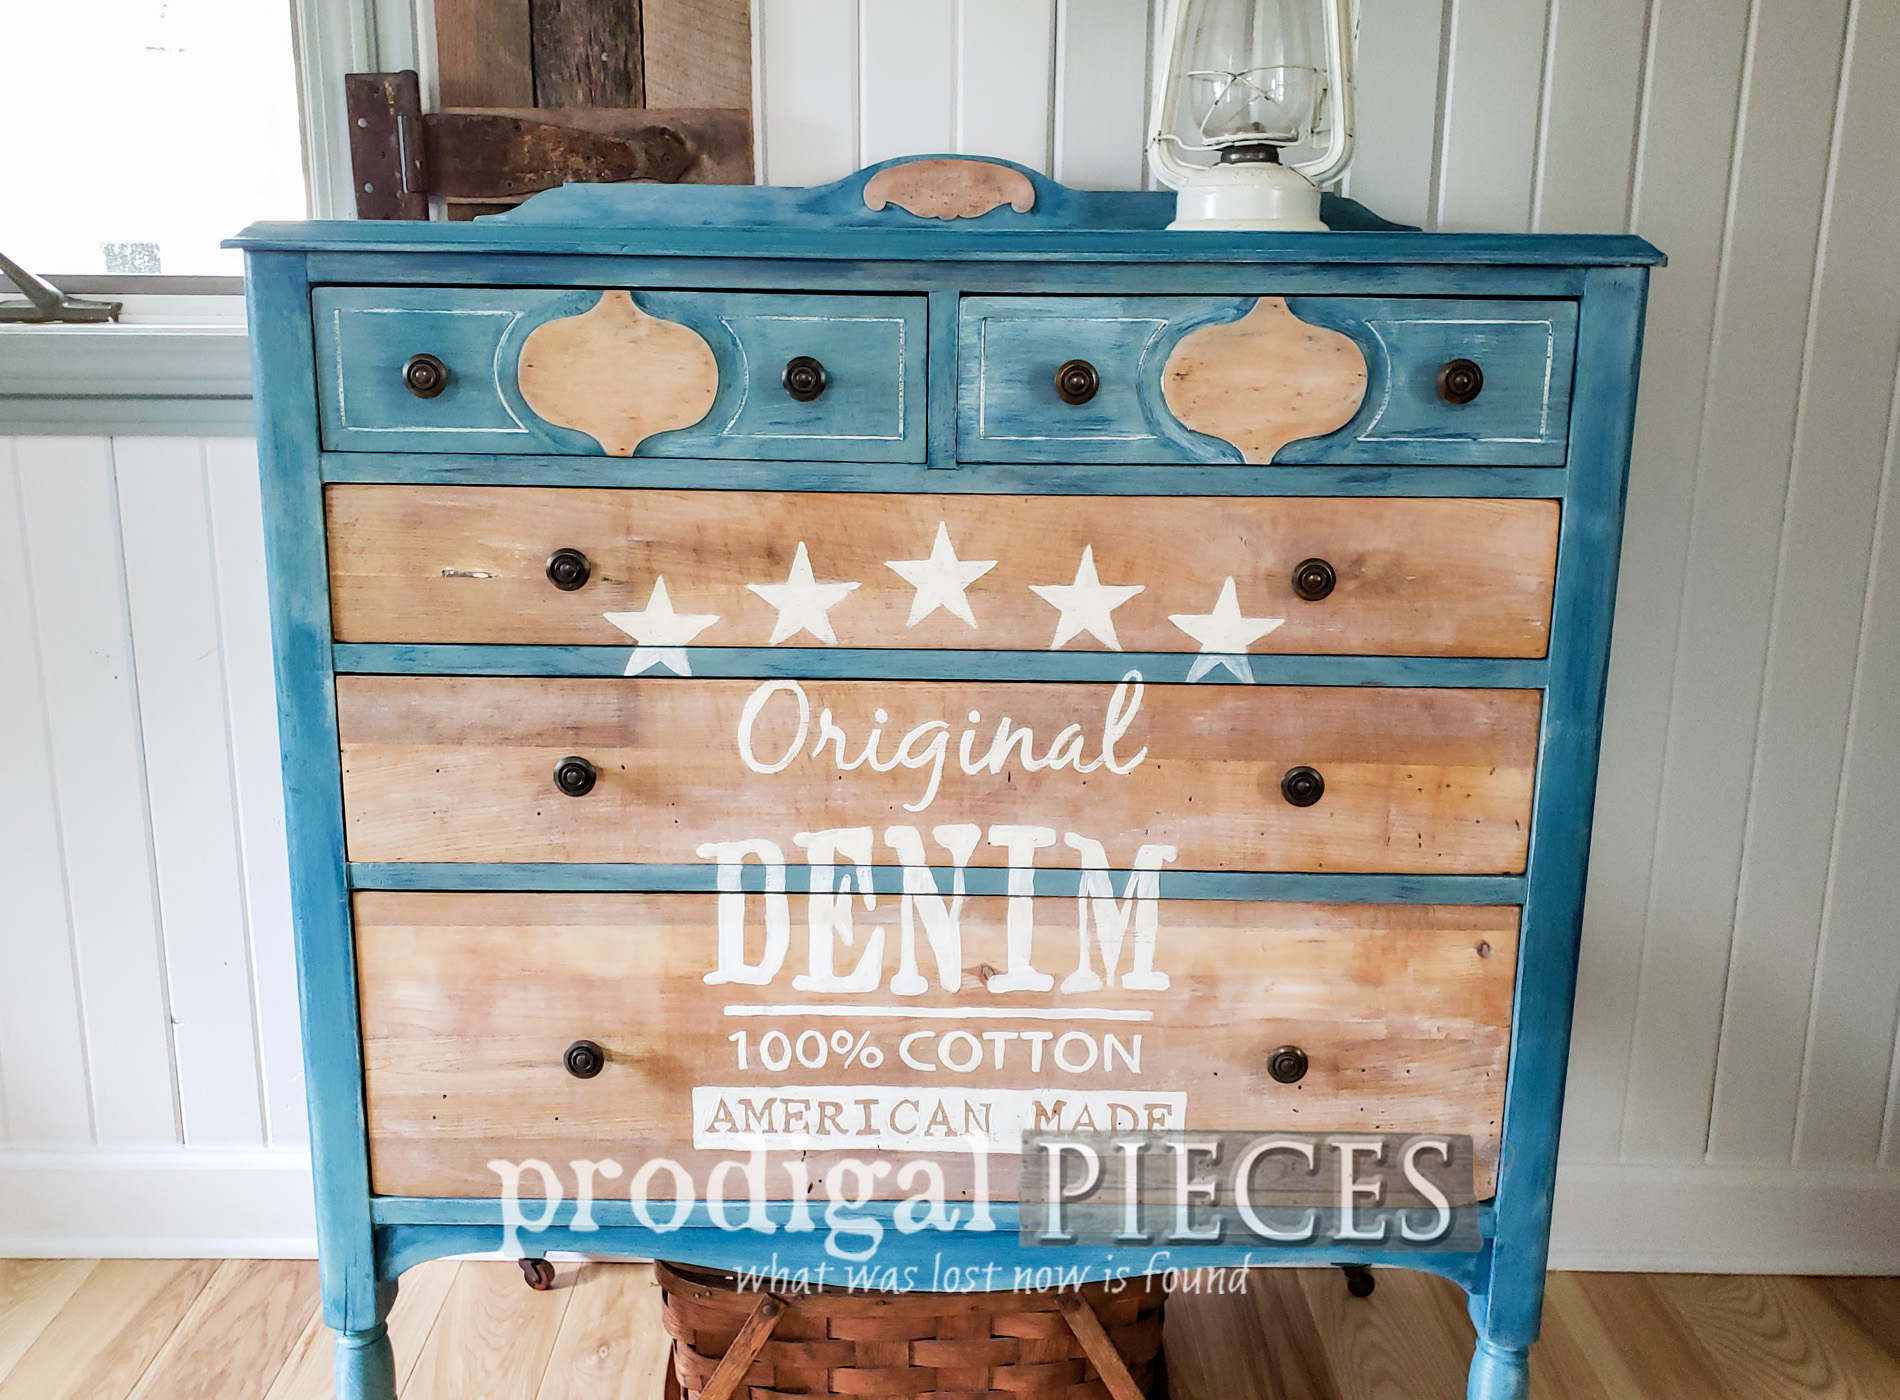 Featured DIY Denim Paint Technique on Antique Chest of Drawers | Tutorial by Larissa of Prodigal Pieces | prodigalpieces.com #prodigalpieces #diy #furniture #farmhouse #home #homedecor